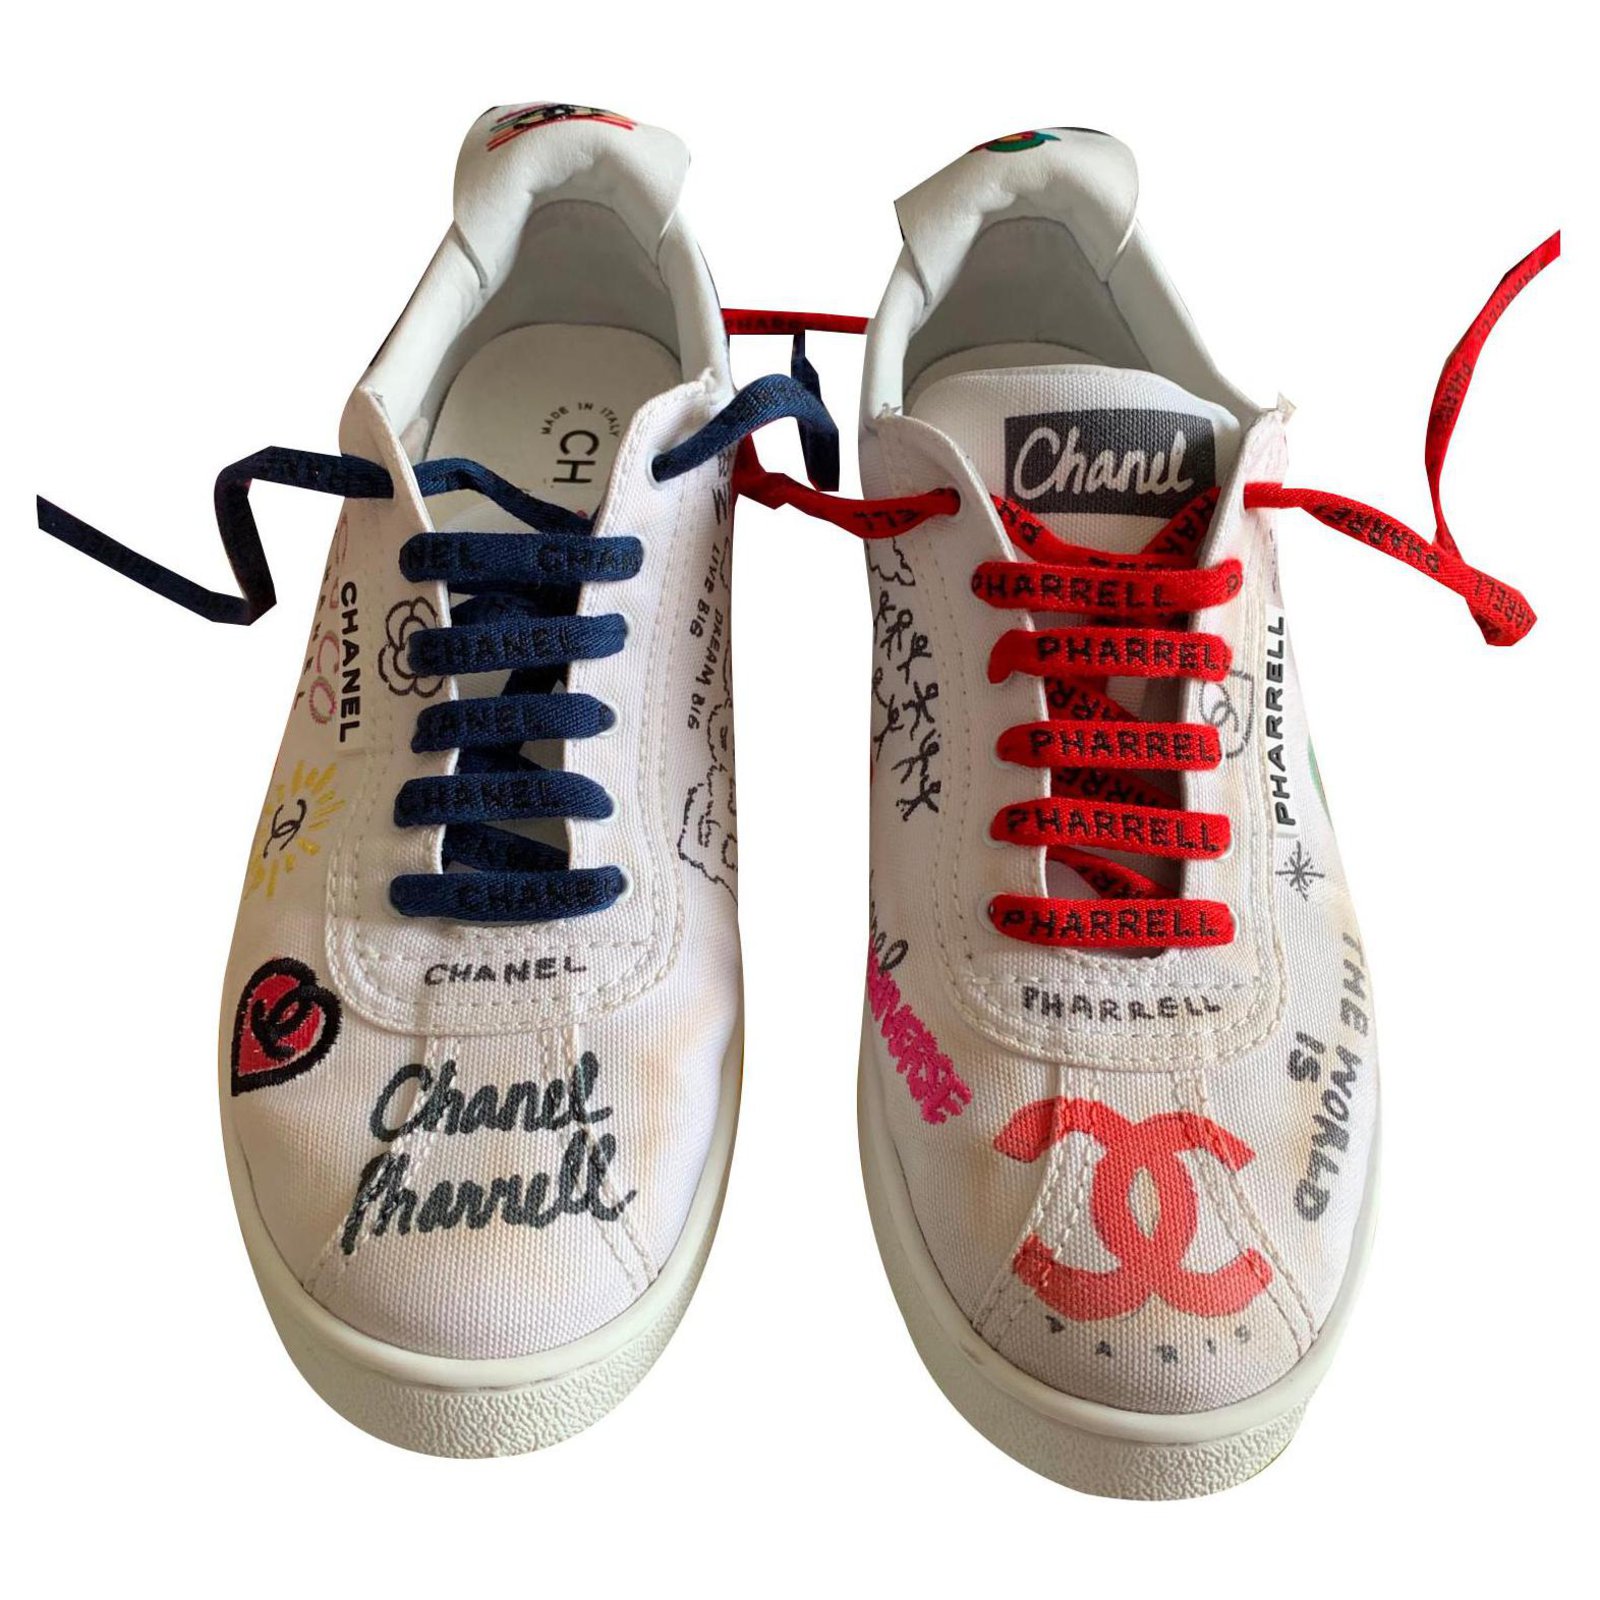 CHANEL PHARRELL sneakers Grafiti collection capsule version used